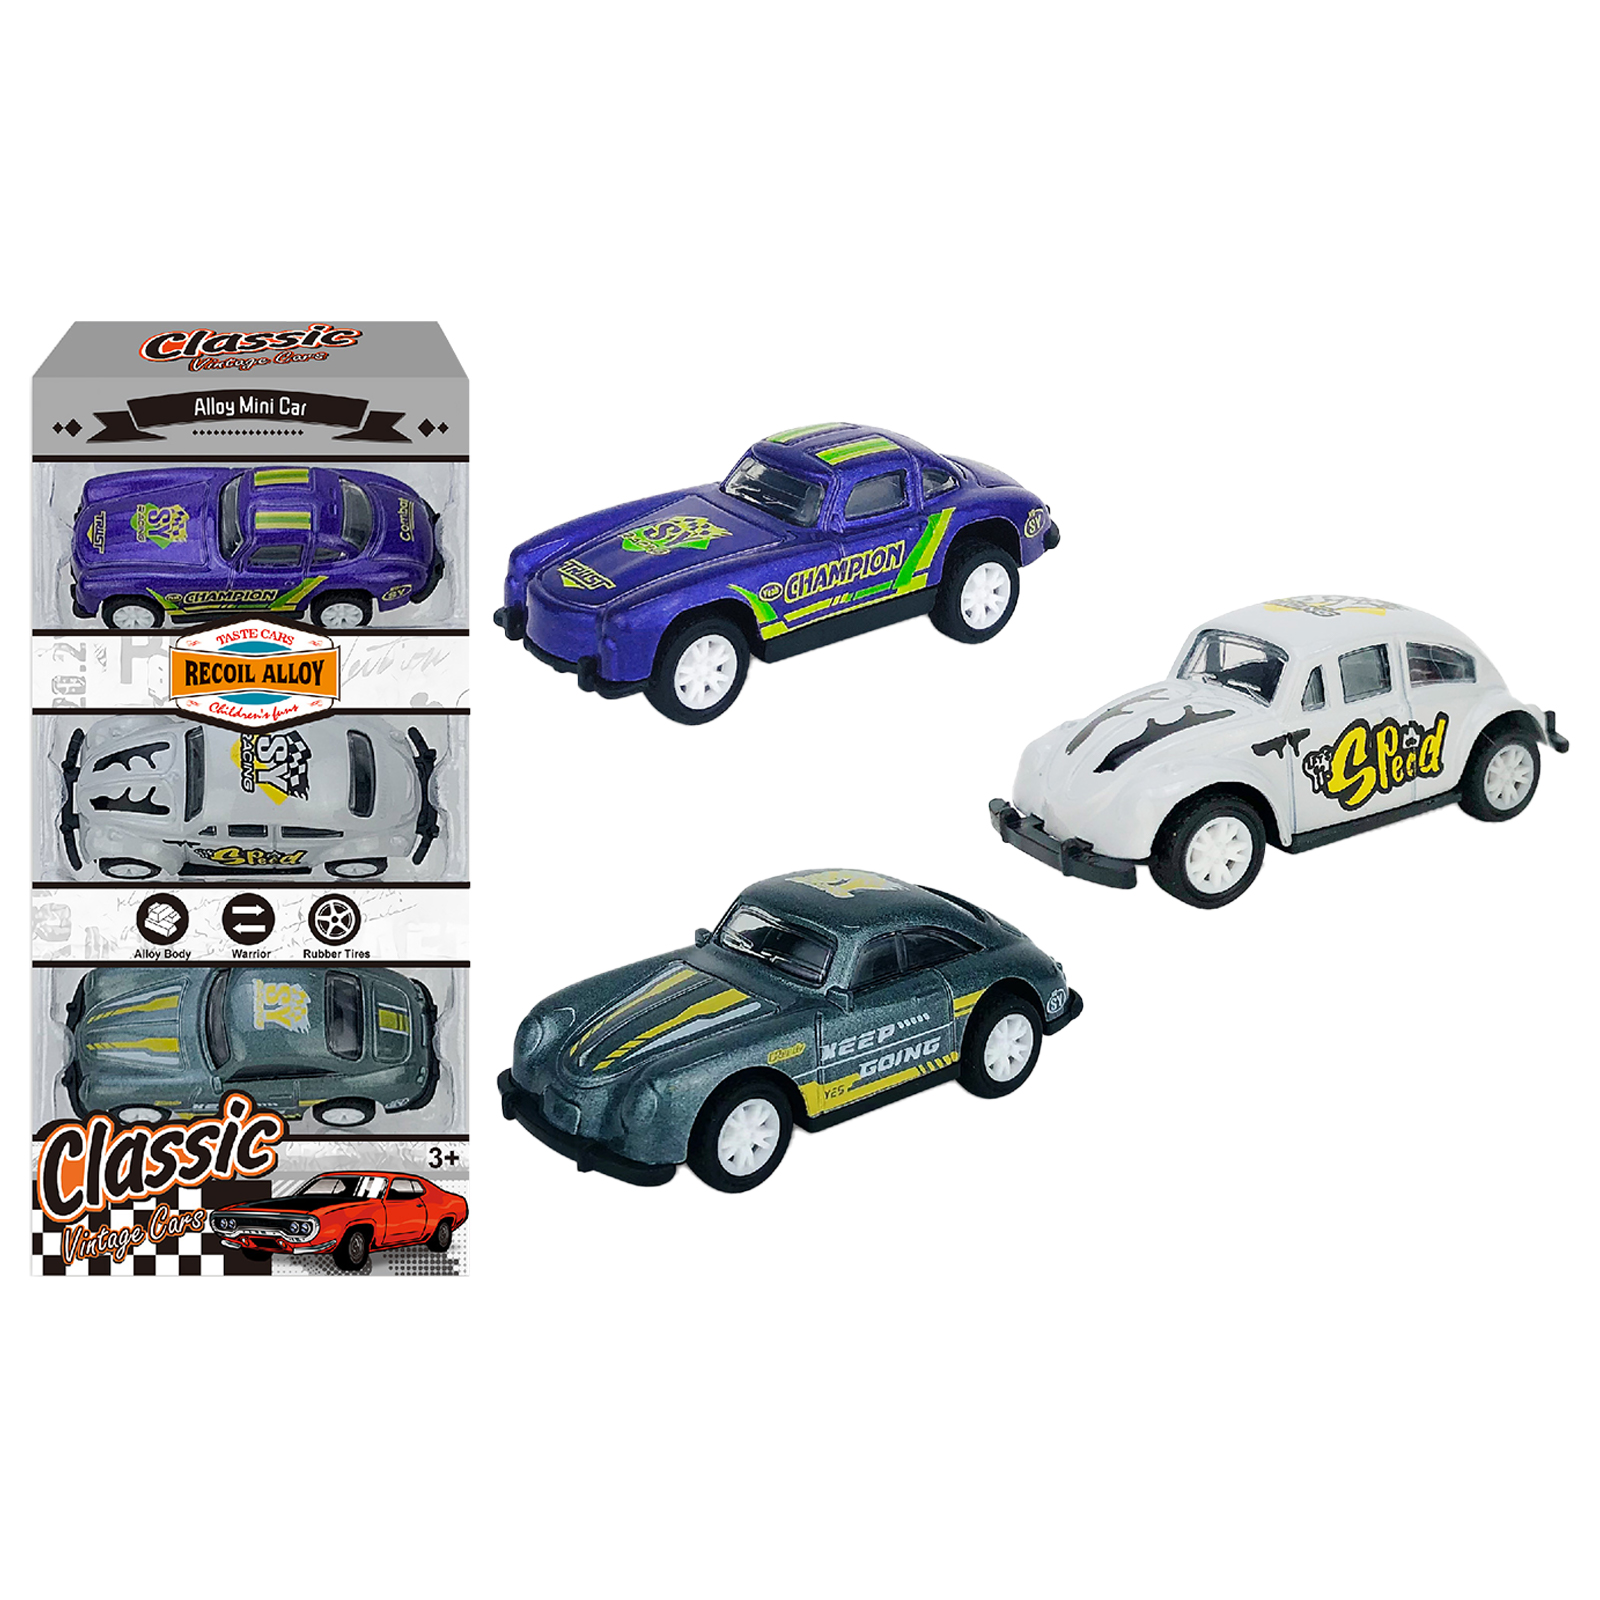 1:64 Alloy Car Model Children Simulation Pull-back Racing Car Toys For Boys Birthday Gifts Collection 3pcs C